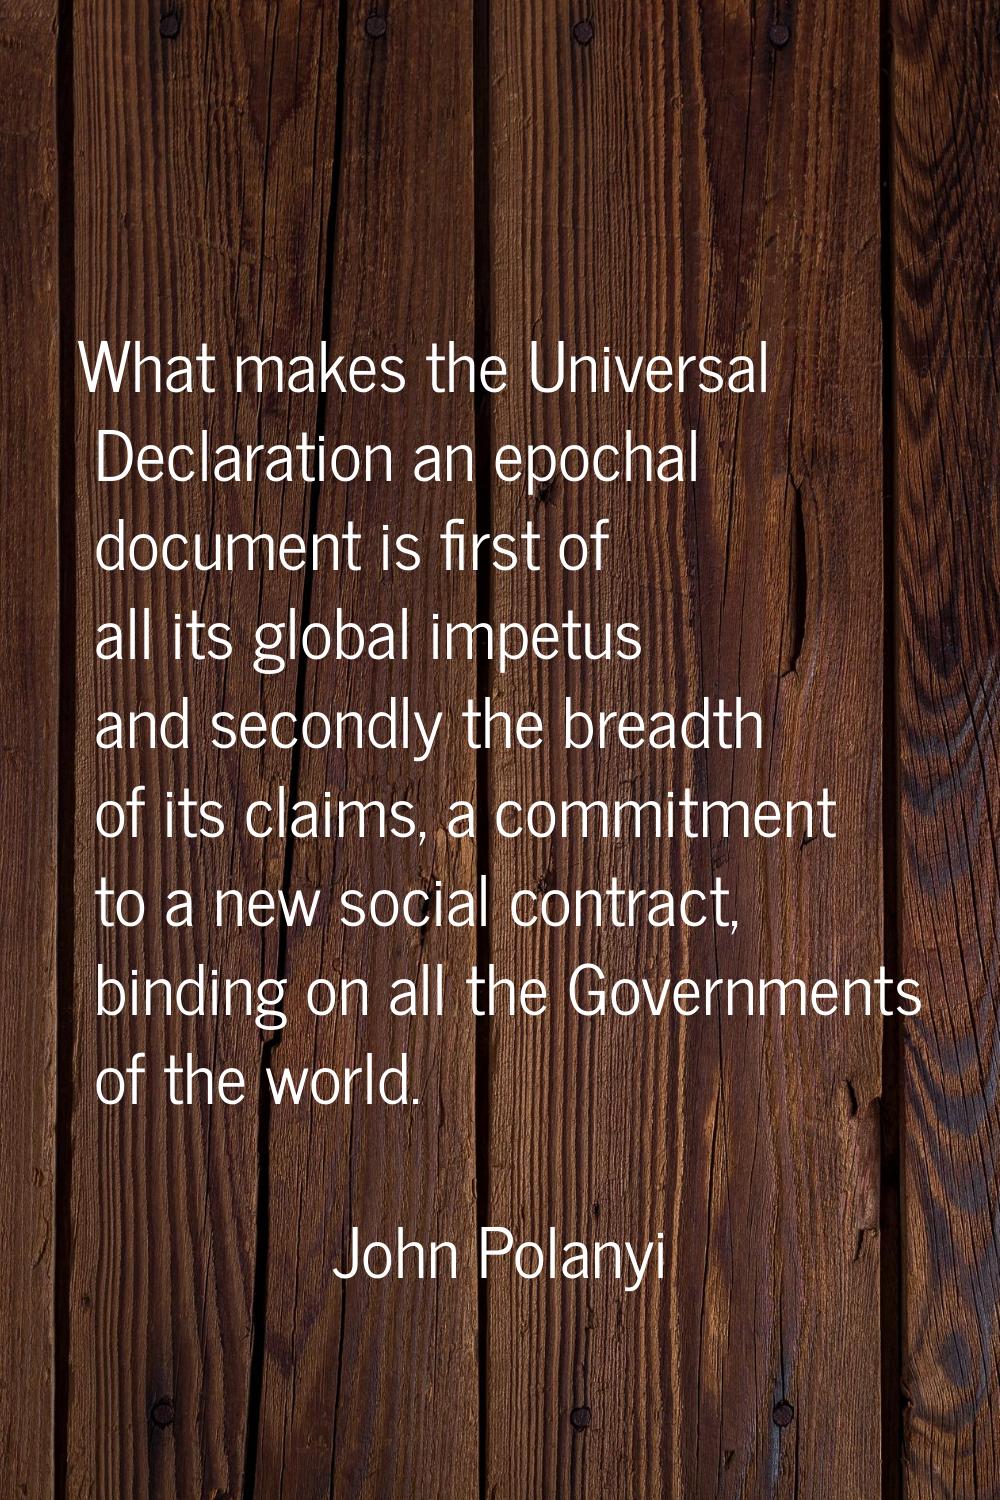 What makes the Universal Declaration an epochal document is first of all its global impetus and sec